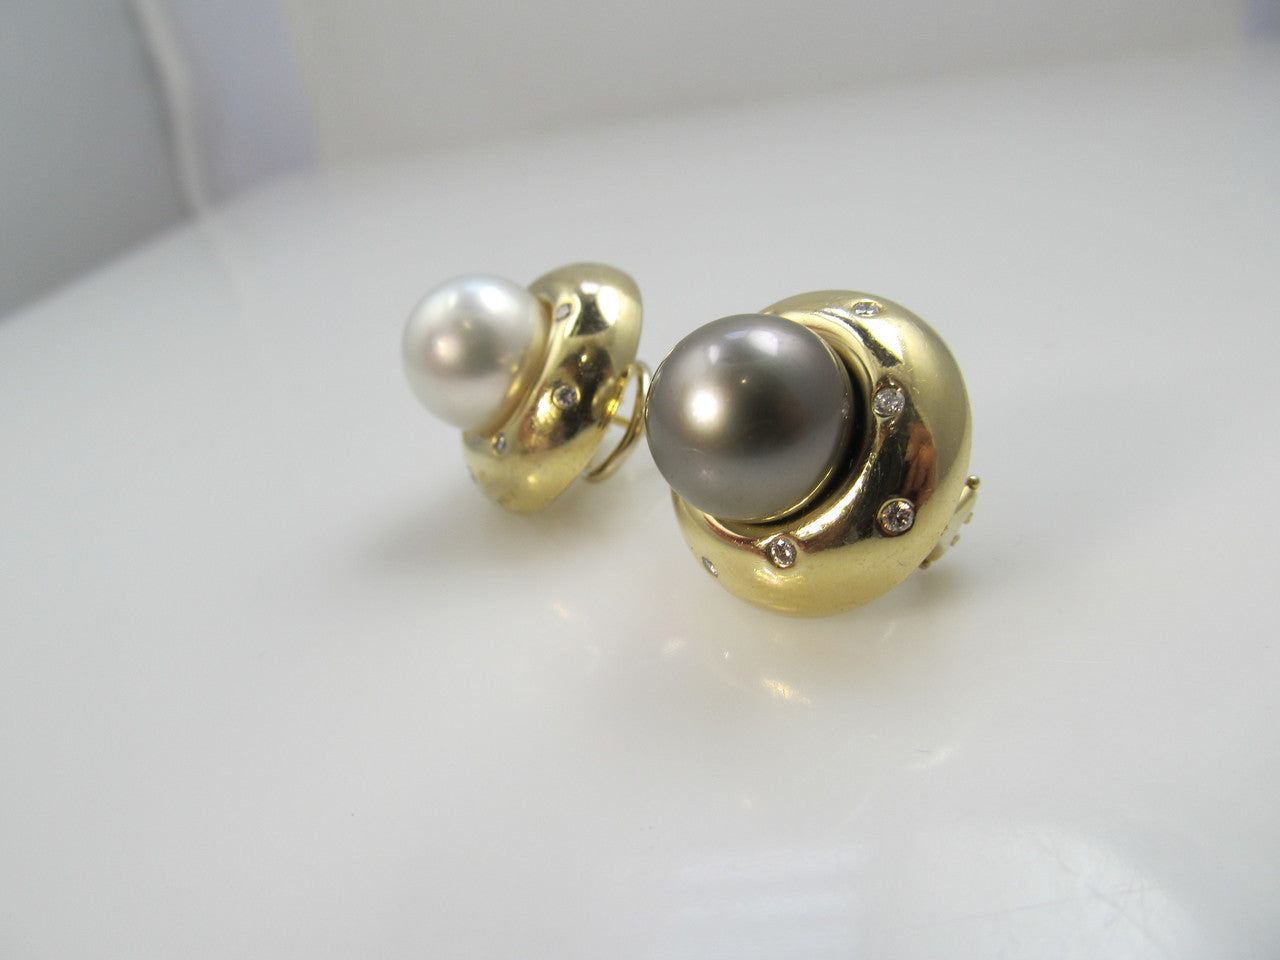 14k Yellow Gold Diamond Earrings With Black And White Pearls